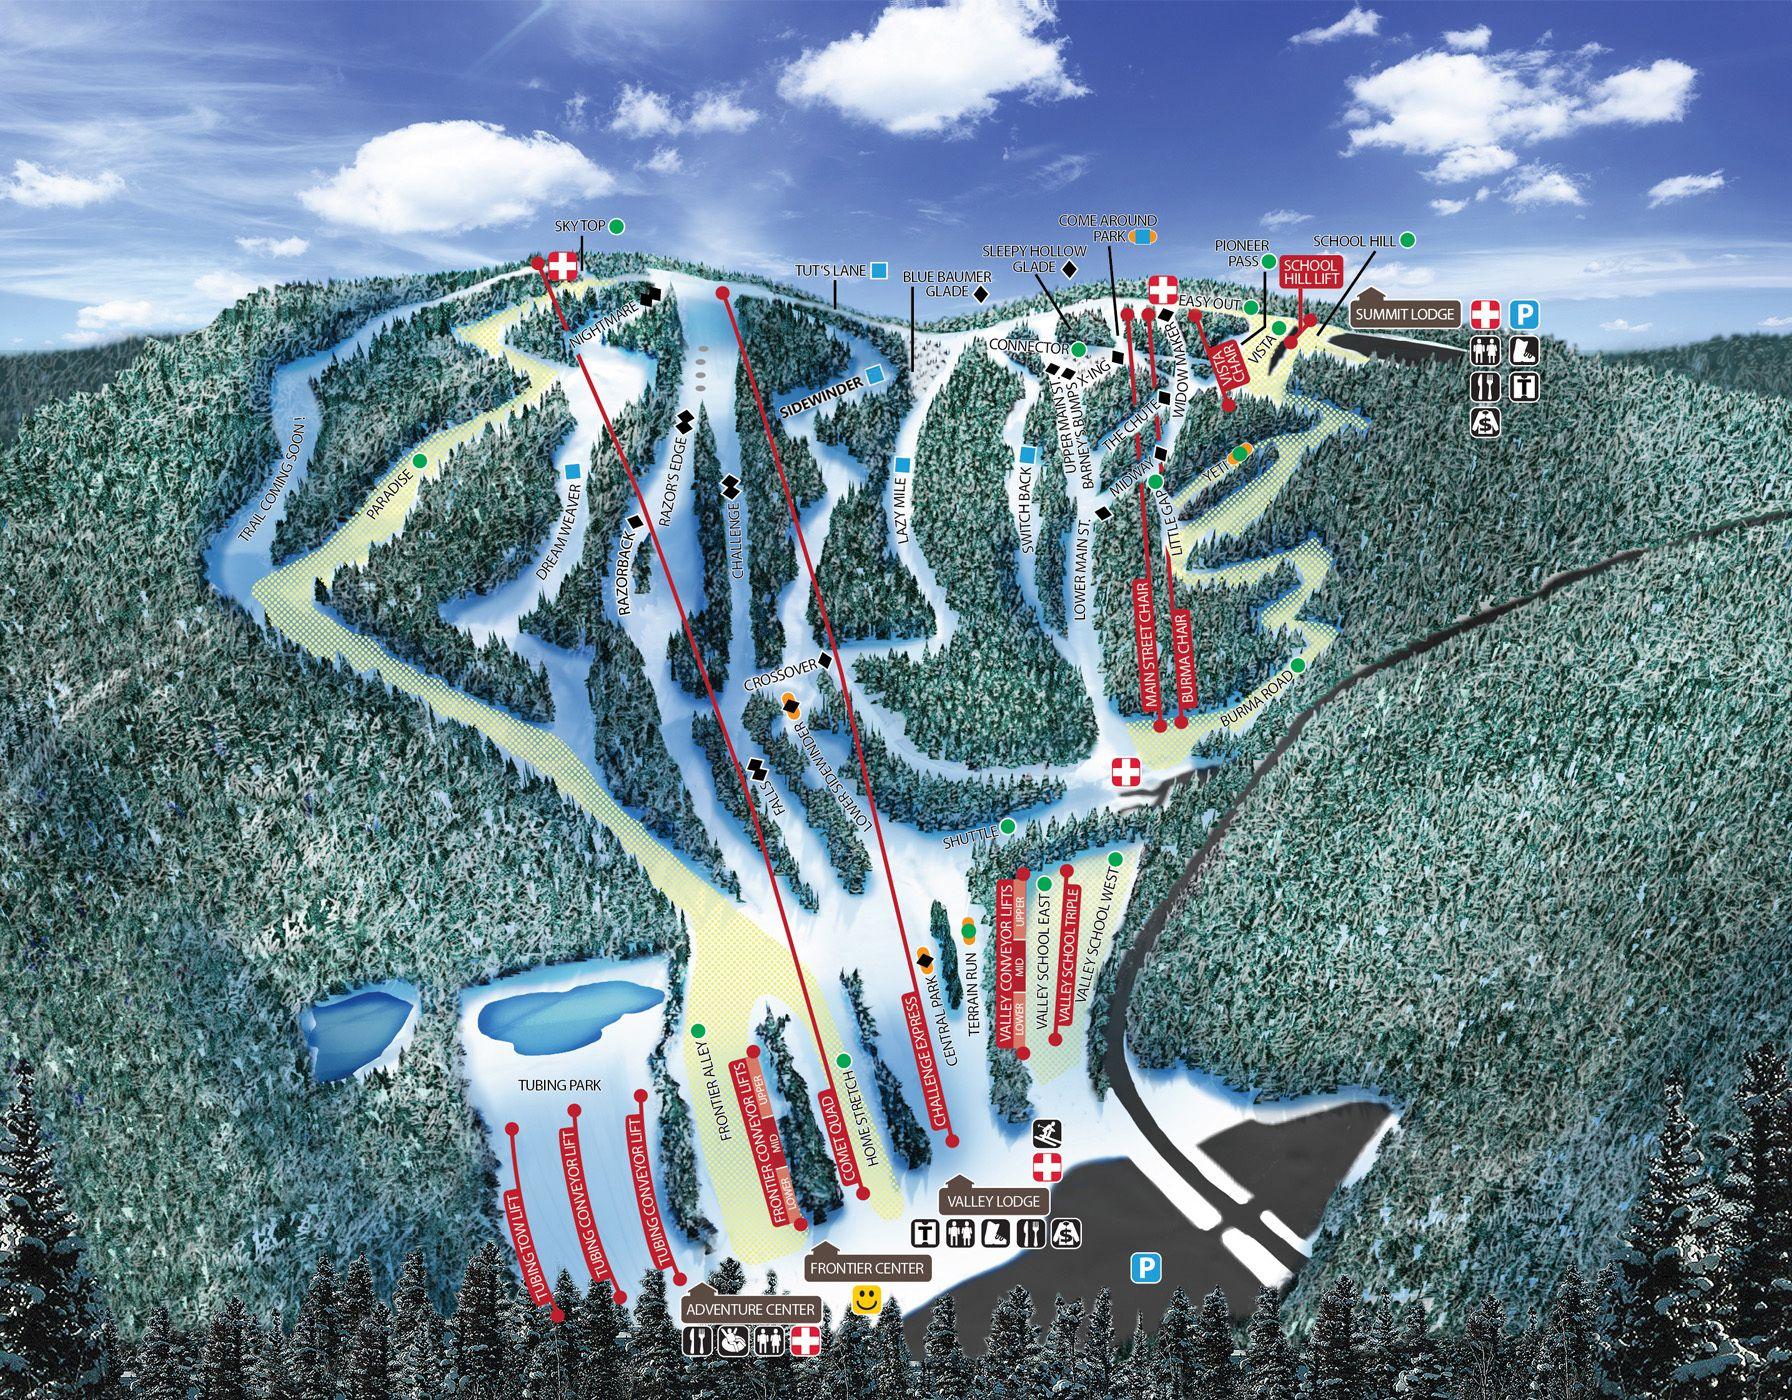 Blue Mountain Resort Logo - Blue Mountain Resort Piste Map. Plan of ski slopes and lifts